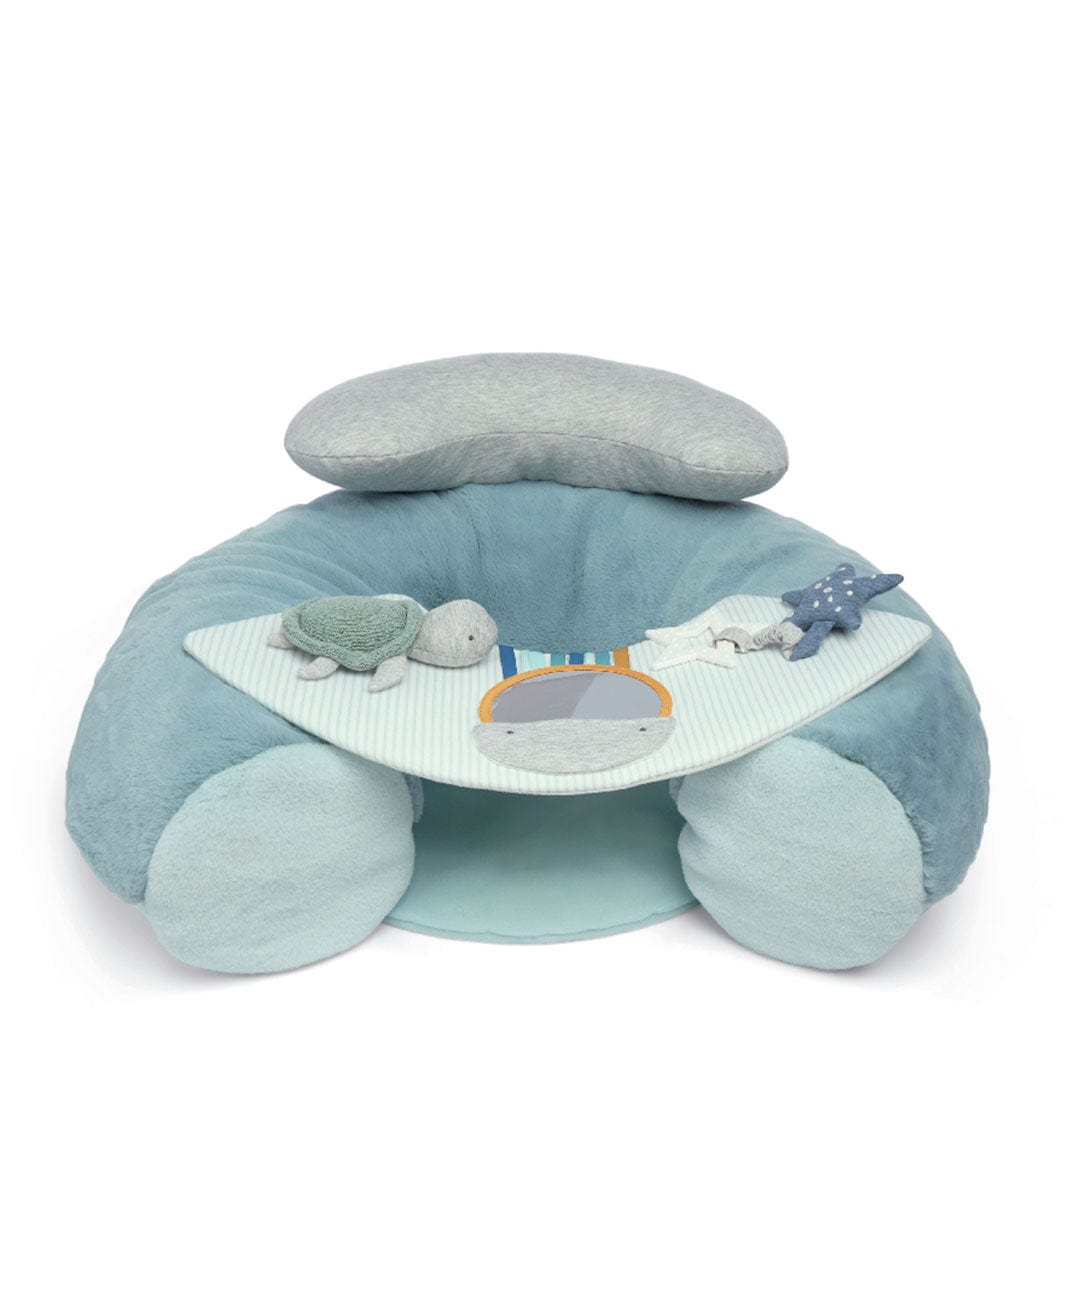 Mamas & Papas Welcome To The World Sit & Play Interactive Seat in Blue